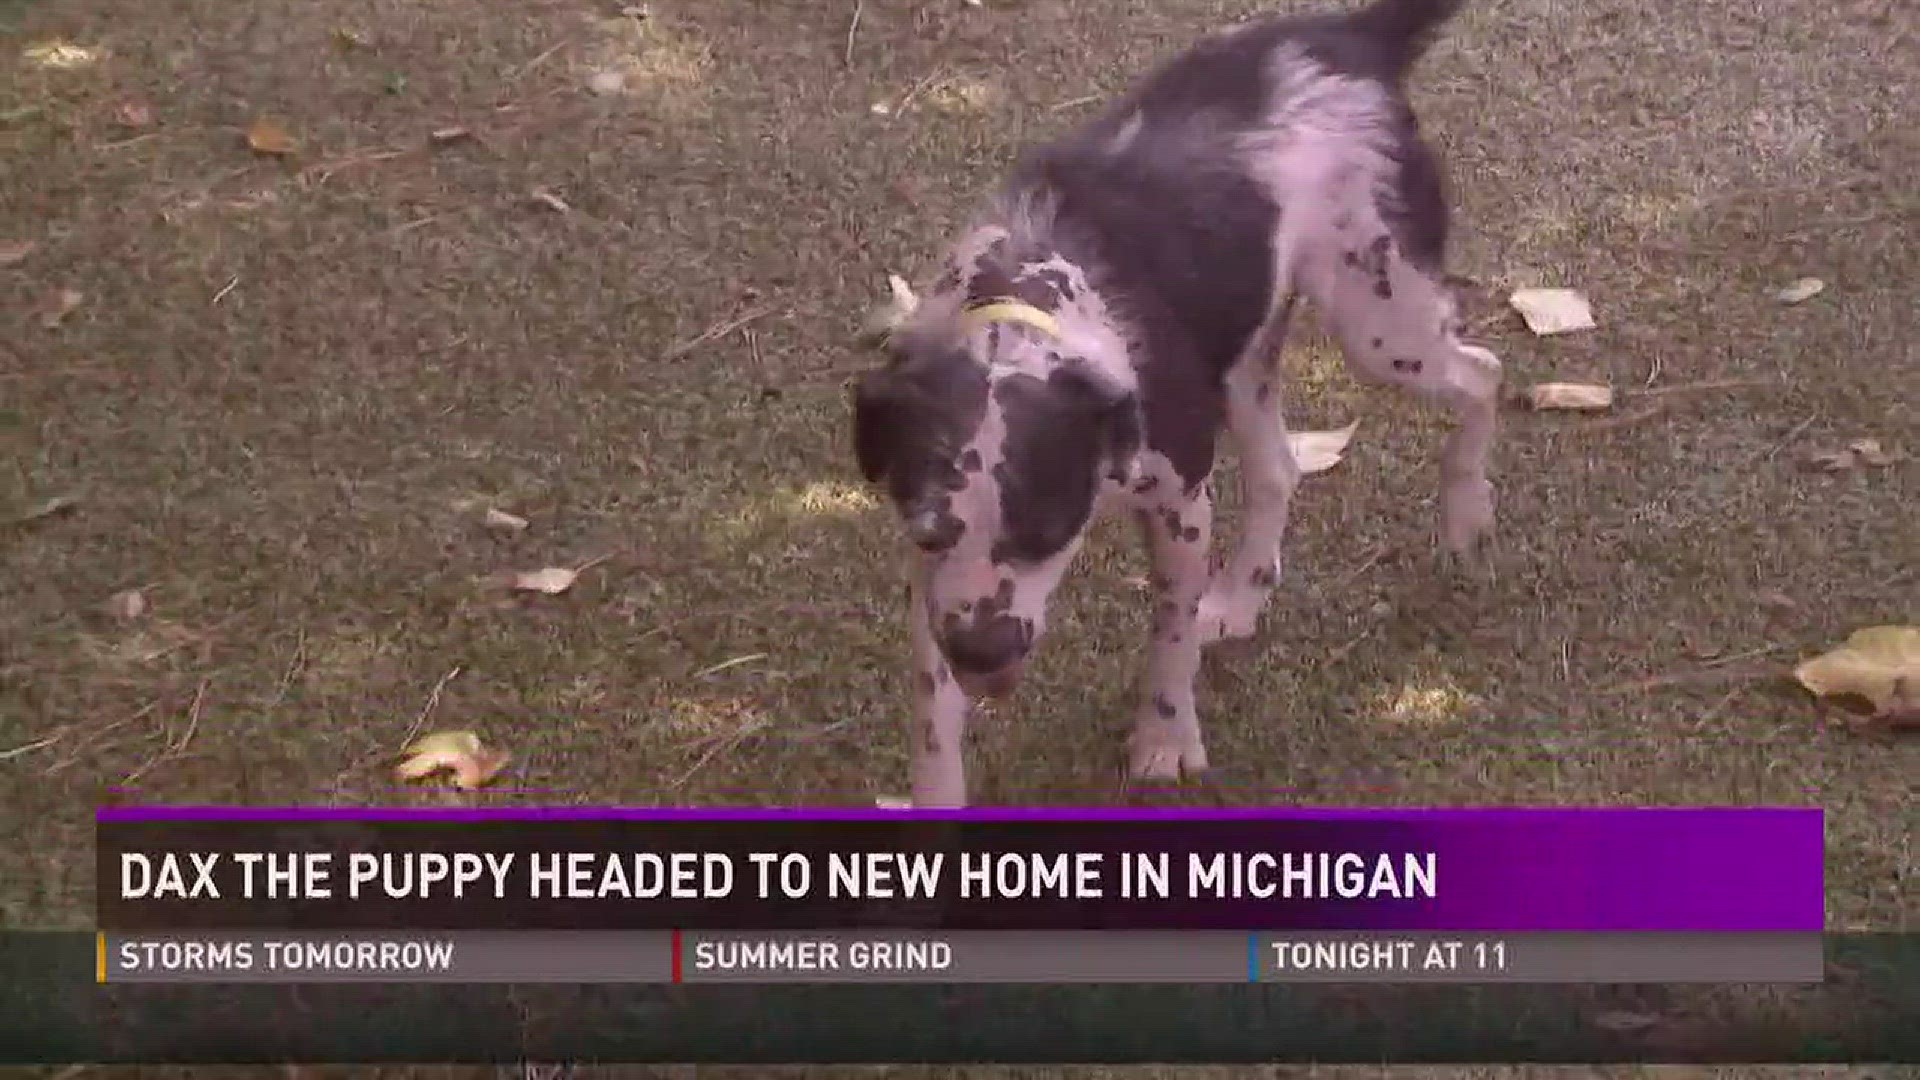 July 27, 2017: Dax the shelter dog is headed to a new home in Michigan.